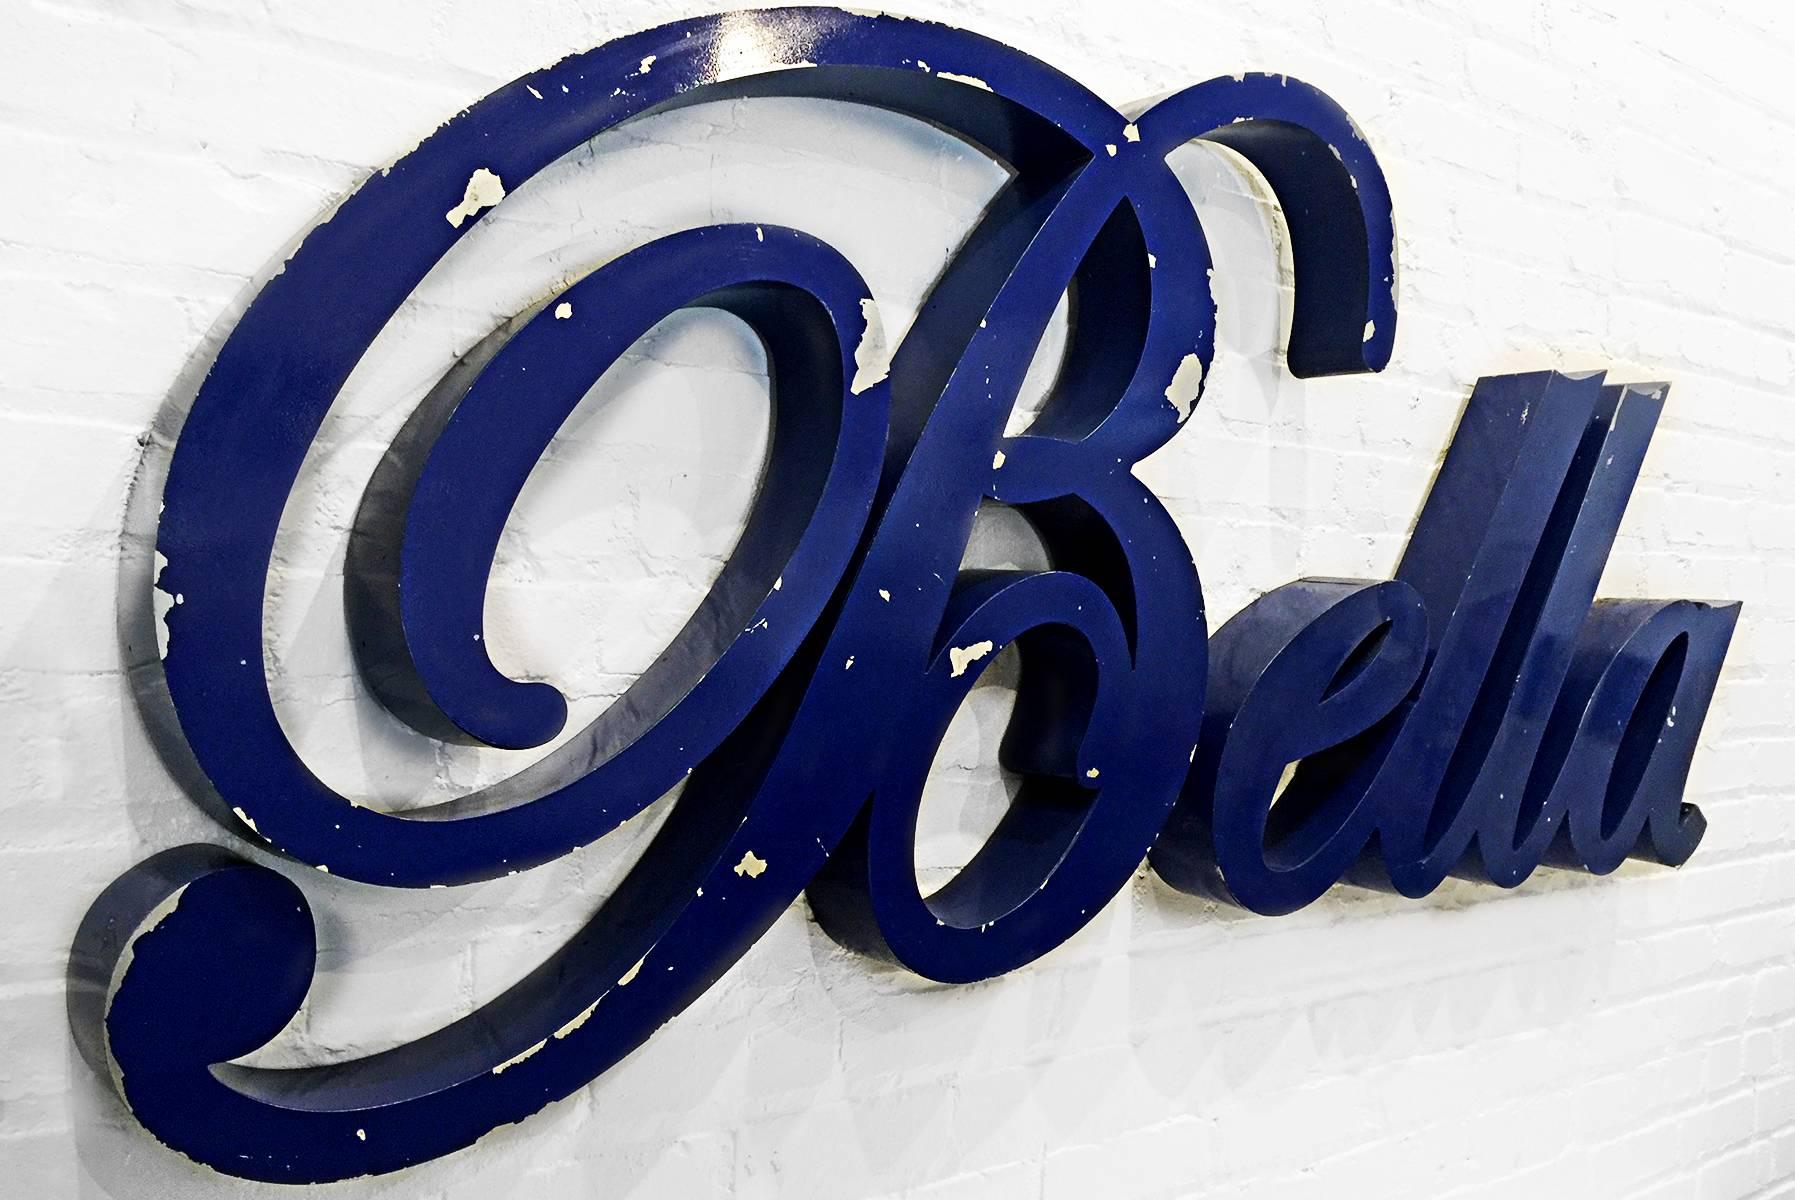 Super swooping script "Bella" sign in distressed blue finish. Great for someone named Bella, or if you just want to say "Beautiful"!! Awesome vintage wall art.
Bella bella!

Dimensions: 3.5" D x 69" W x 29" H.